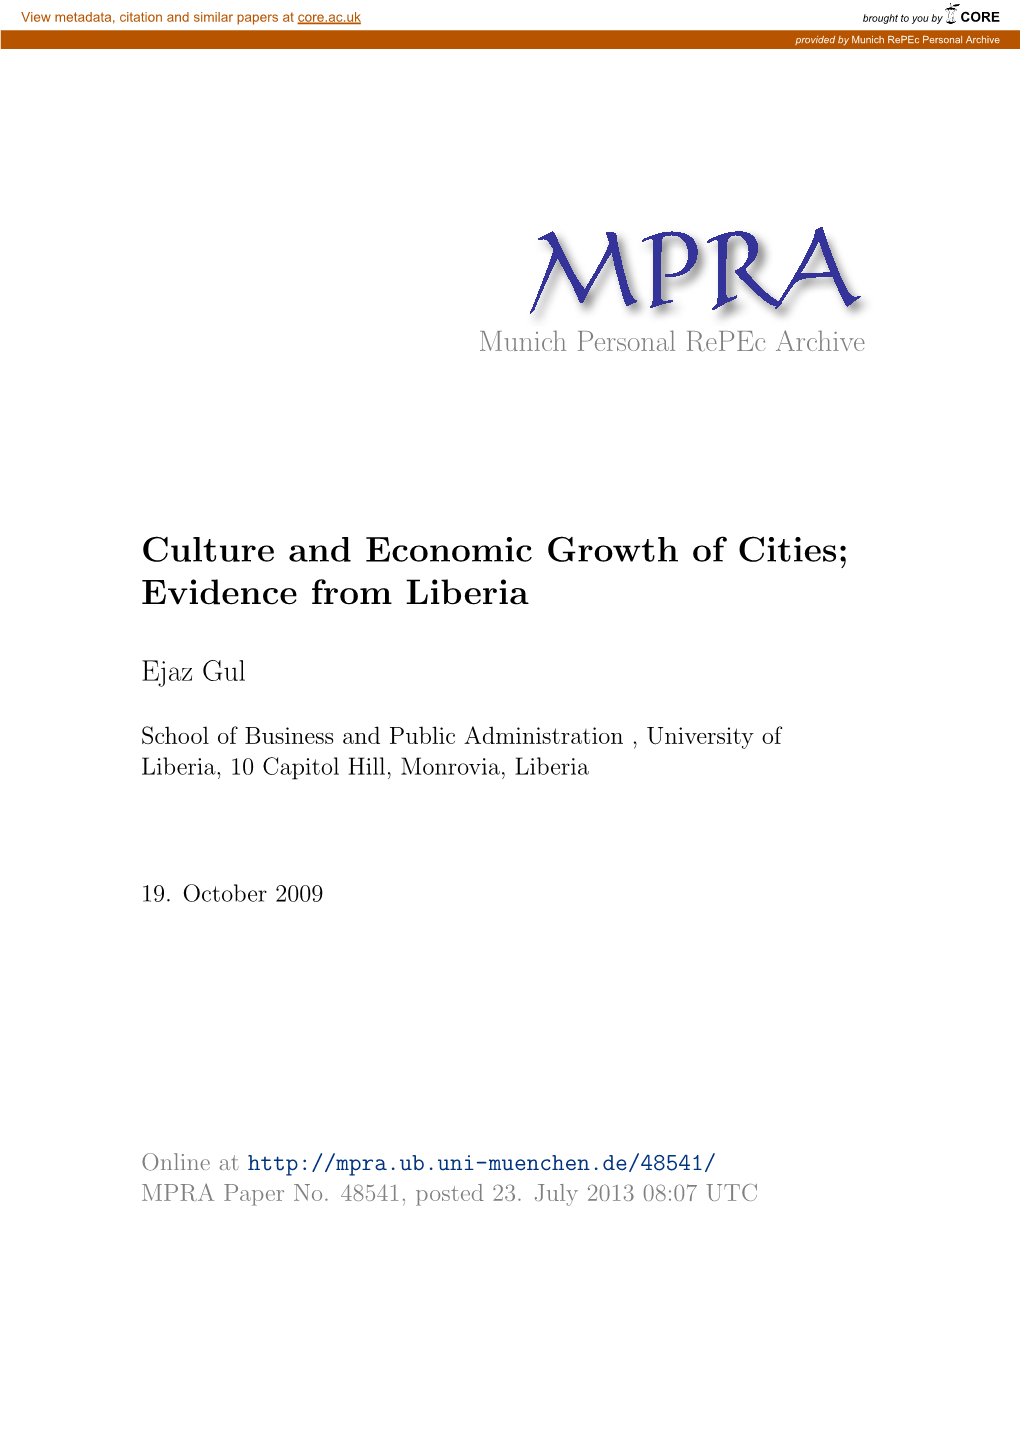 Culture and Economic Growth of Cities; Evidence from Liberia